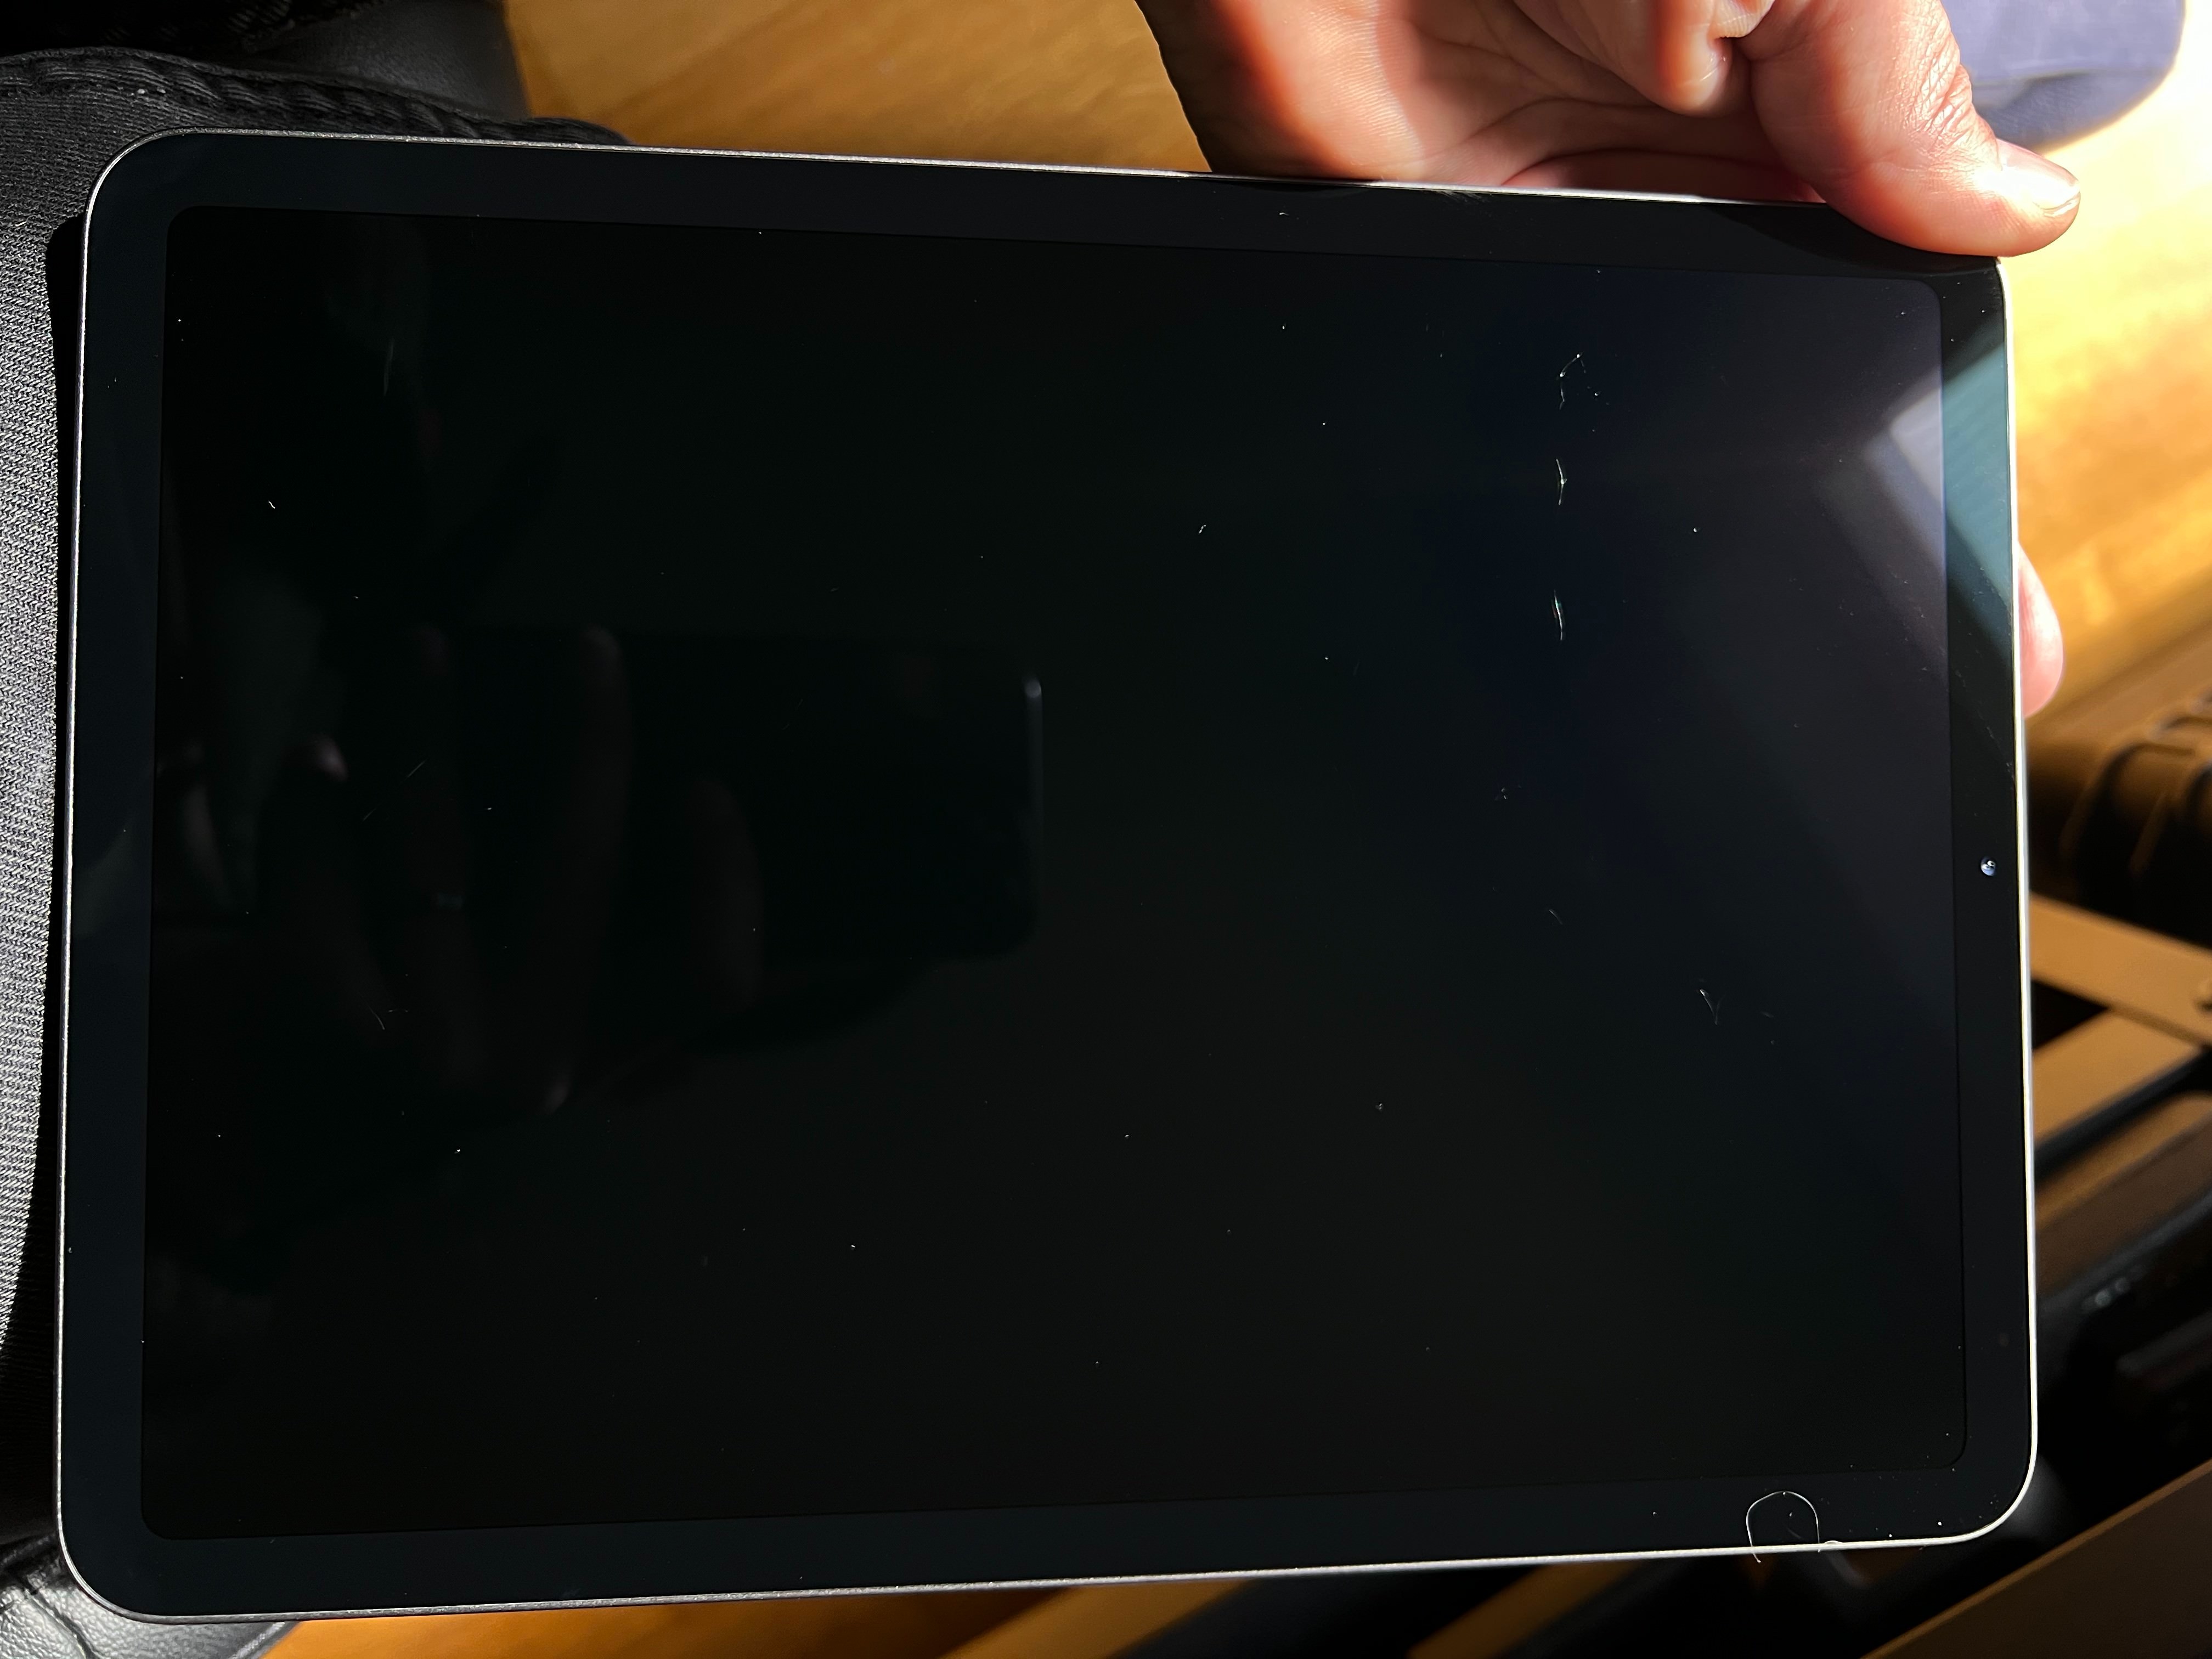 Does the iPad air scratch easily?